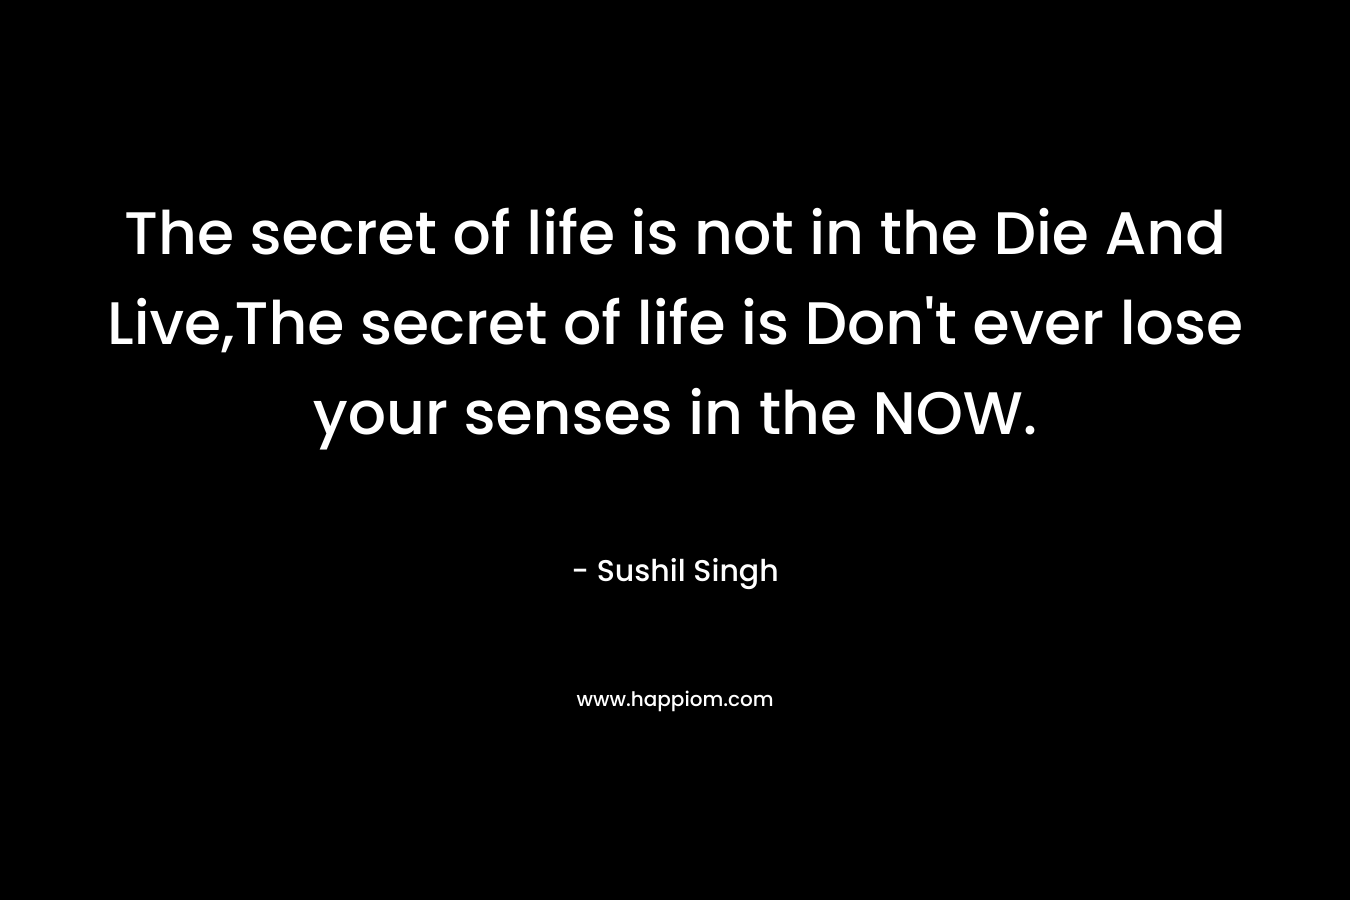 The secret of life is not in the Die And Live,The secret of life is Don't ever lose your senses in the NOW.